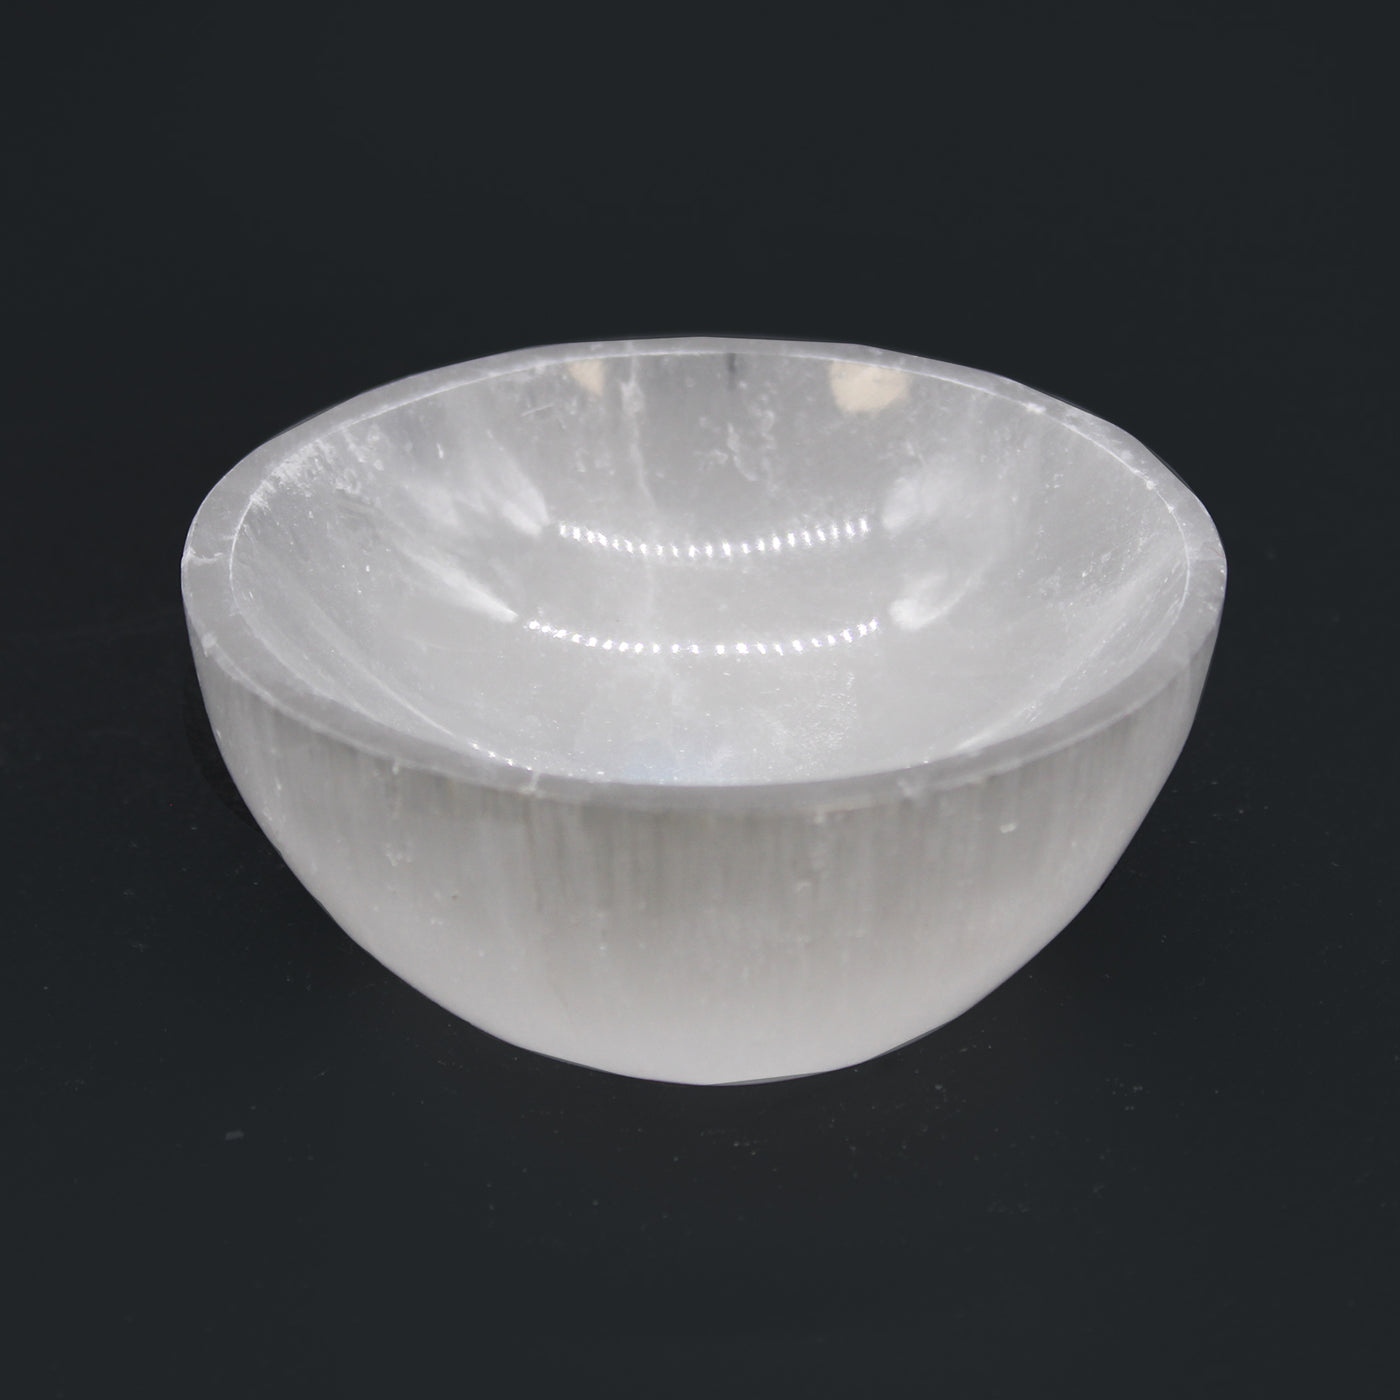 Small Selenite Round Bowl For Fruit And Snacks. 